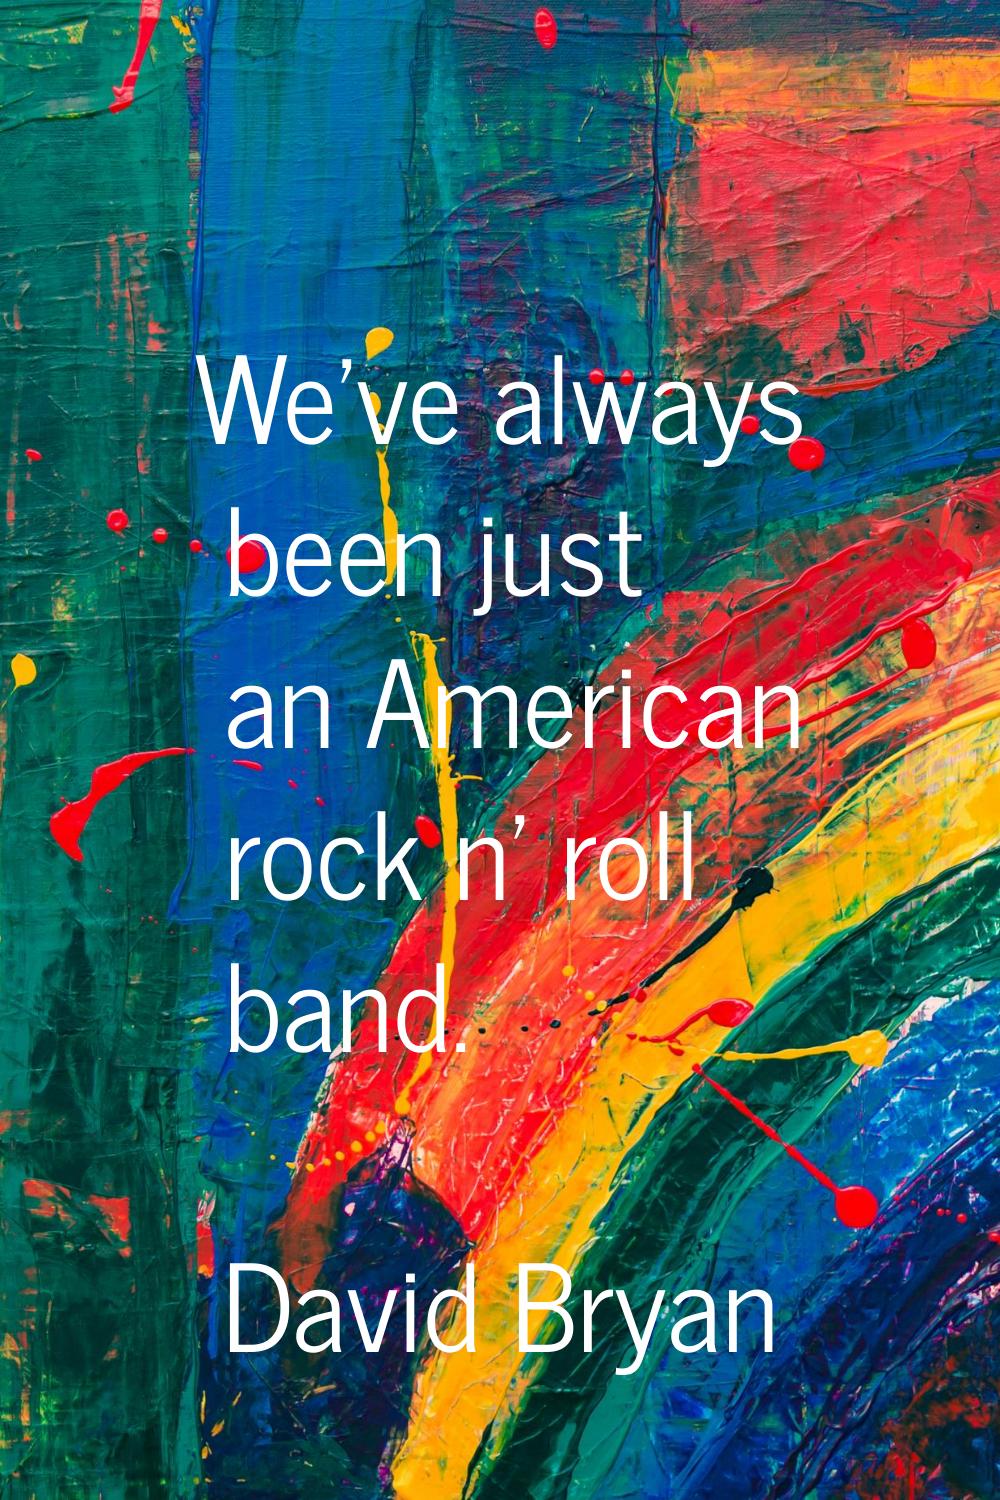 We've always been just an American rock n' roll band.